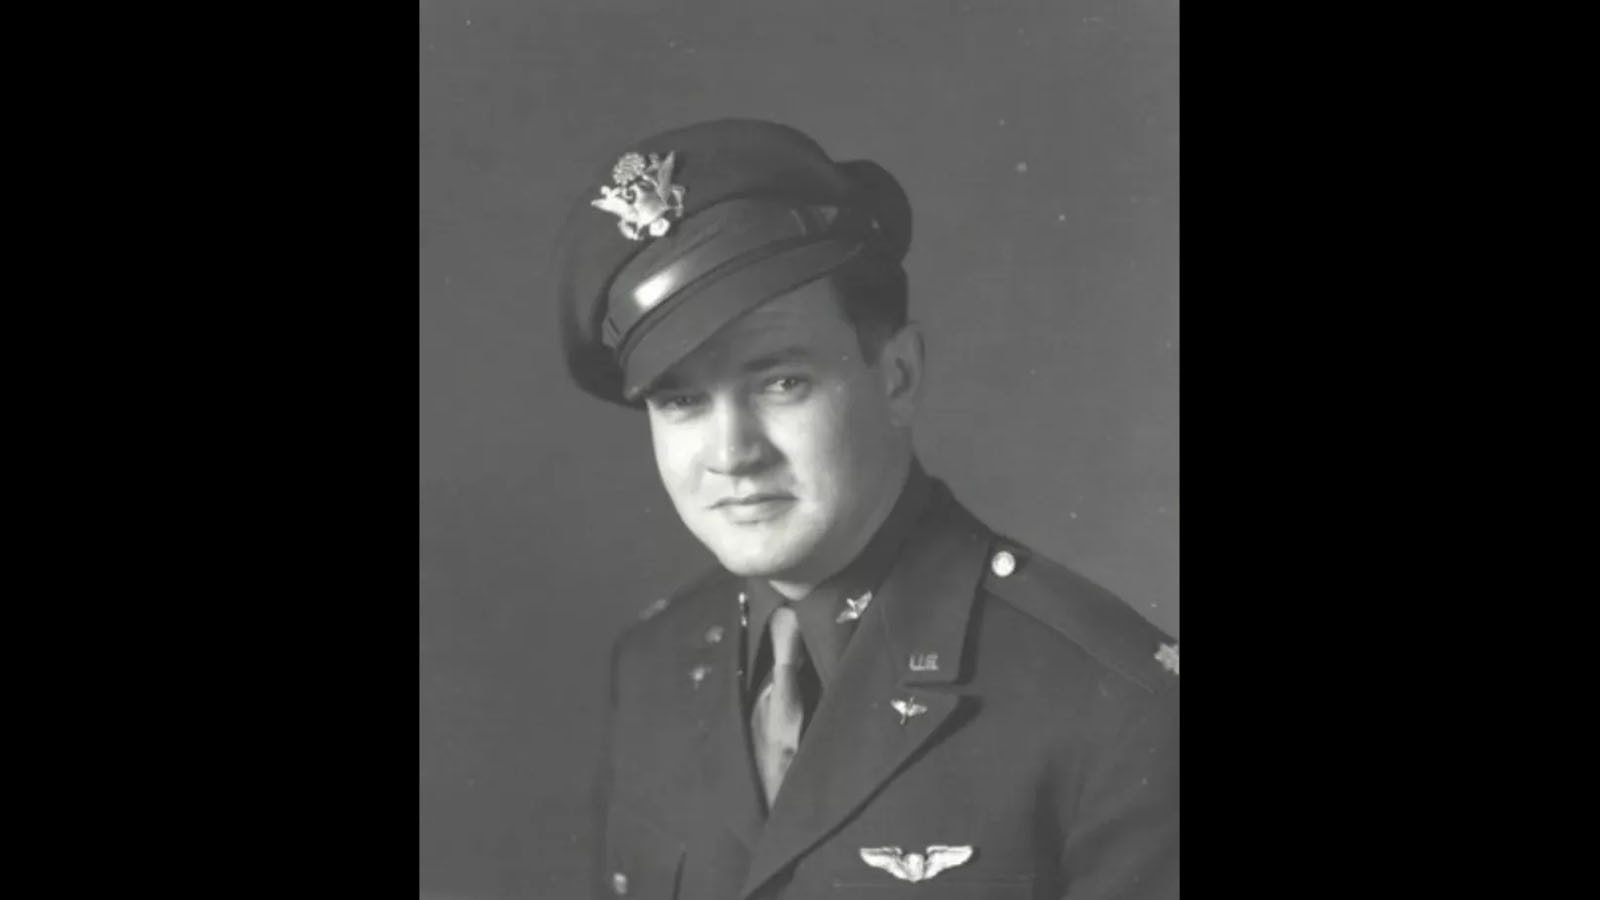 Maj. Gale "Buck" Cleven, who graduated as the valedictorian of Midwest High School, flew B-17 bombers over Europe and received the Distinguished Flying Cross for his bravery on a mission in August 1943.